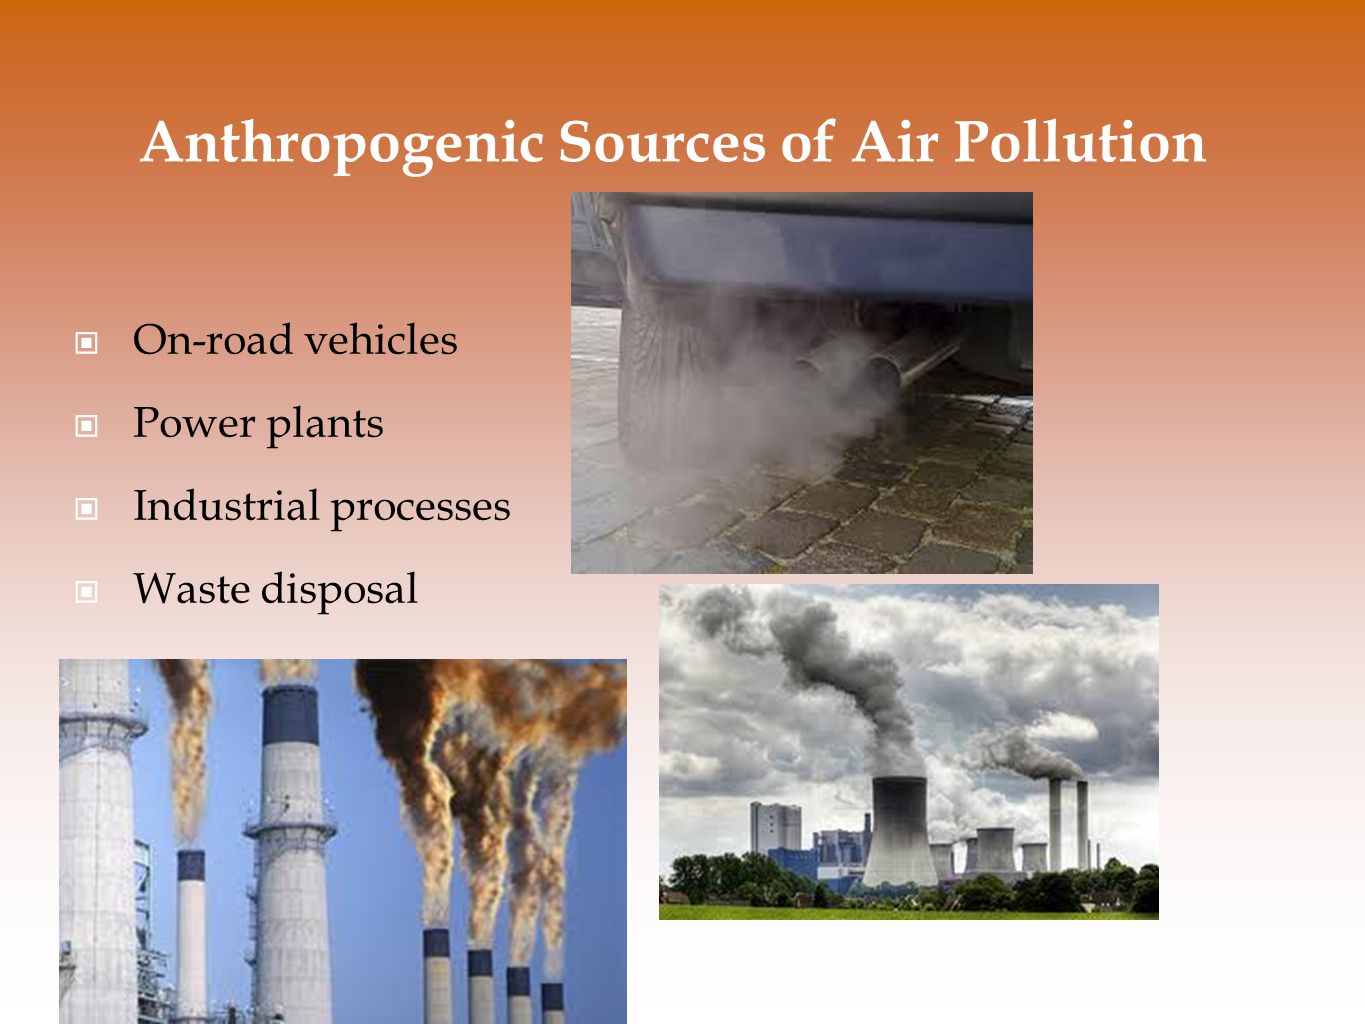 Where Does Air Pollution Come From?